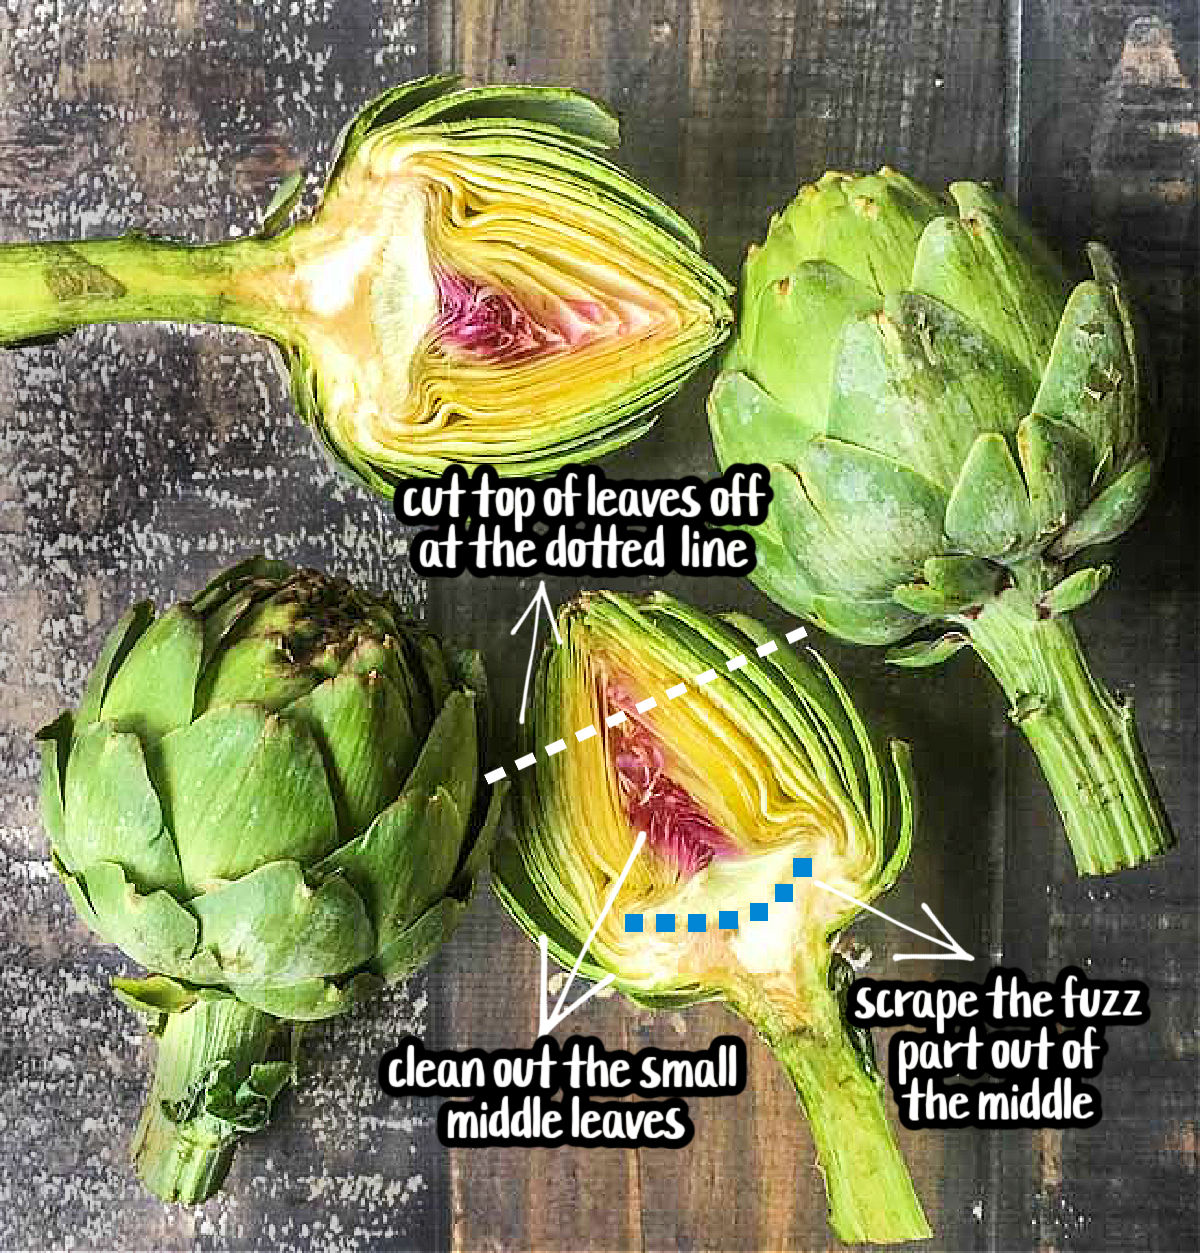 raw artichokes diagram of how to cut